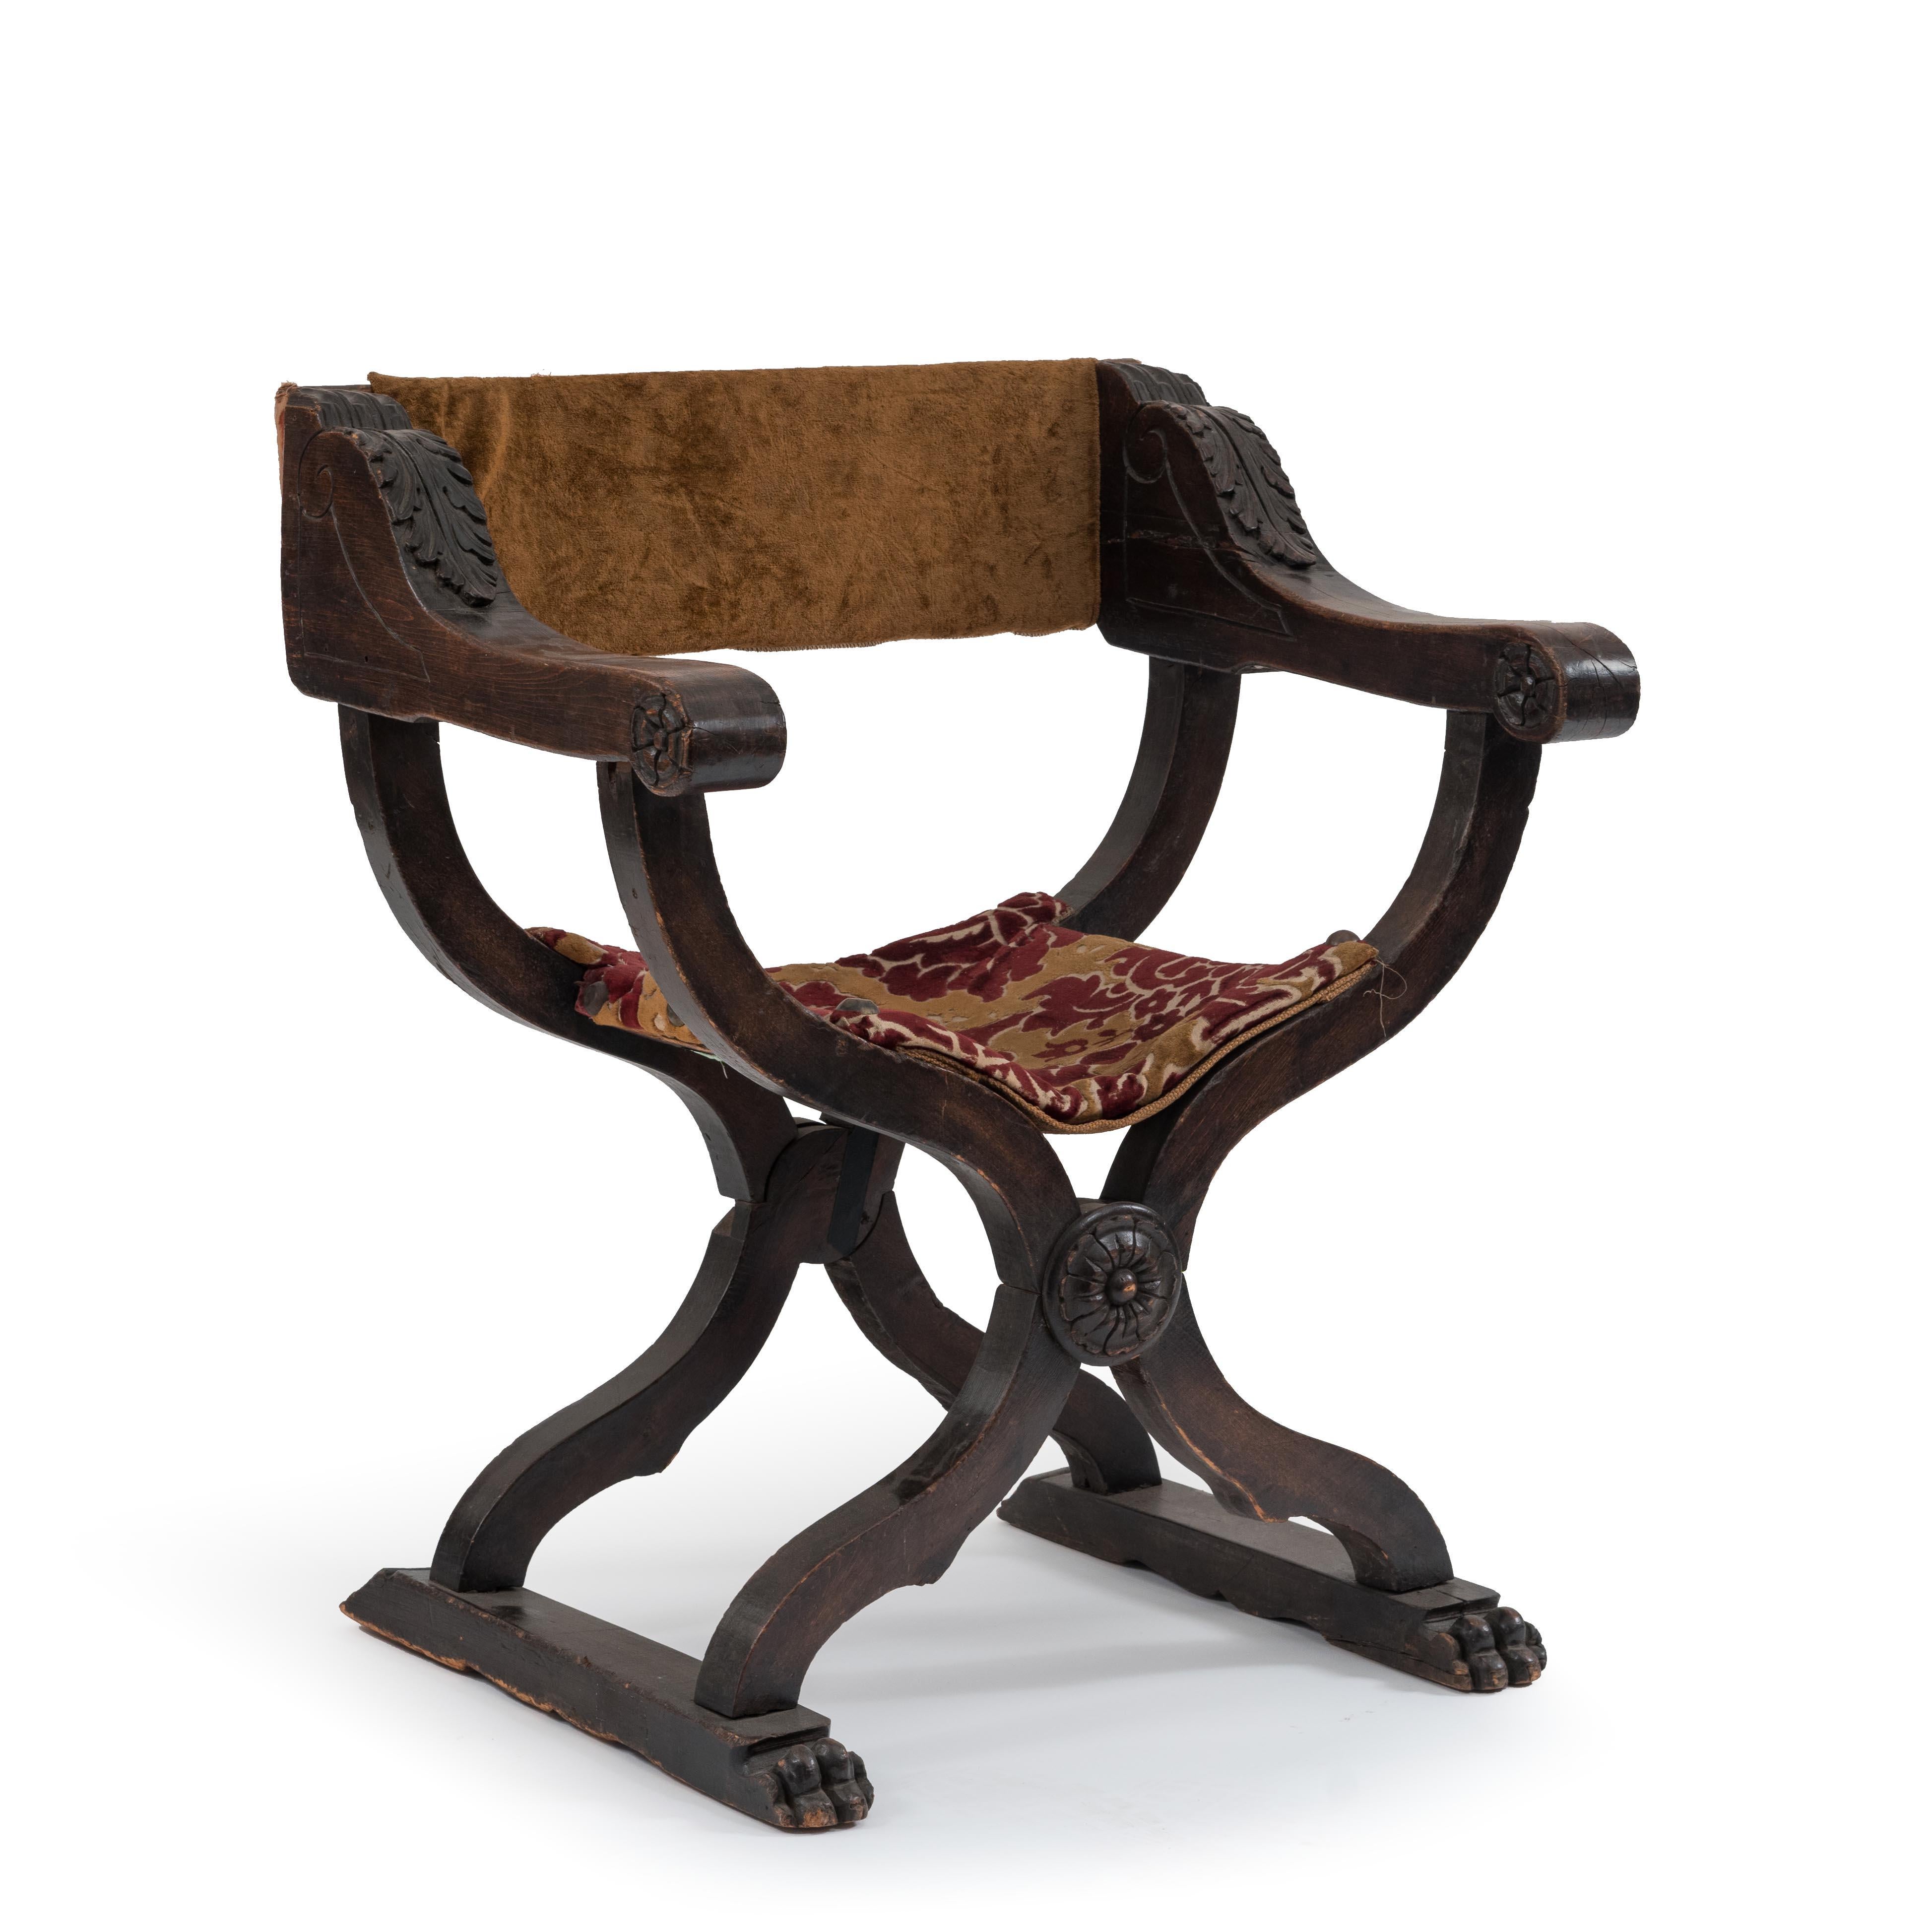 Italian Renaissance Savanarola style walnut arm chair with red velvet upholstery and carved front (19th Cent).
  